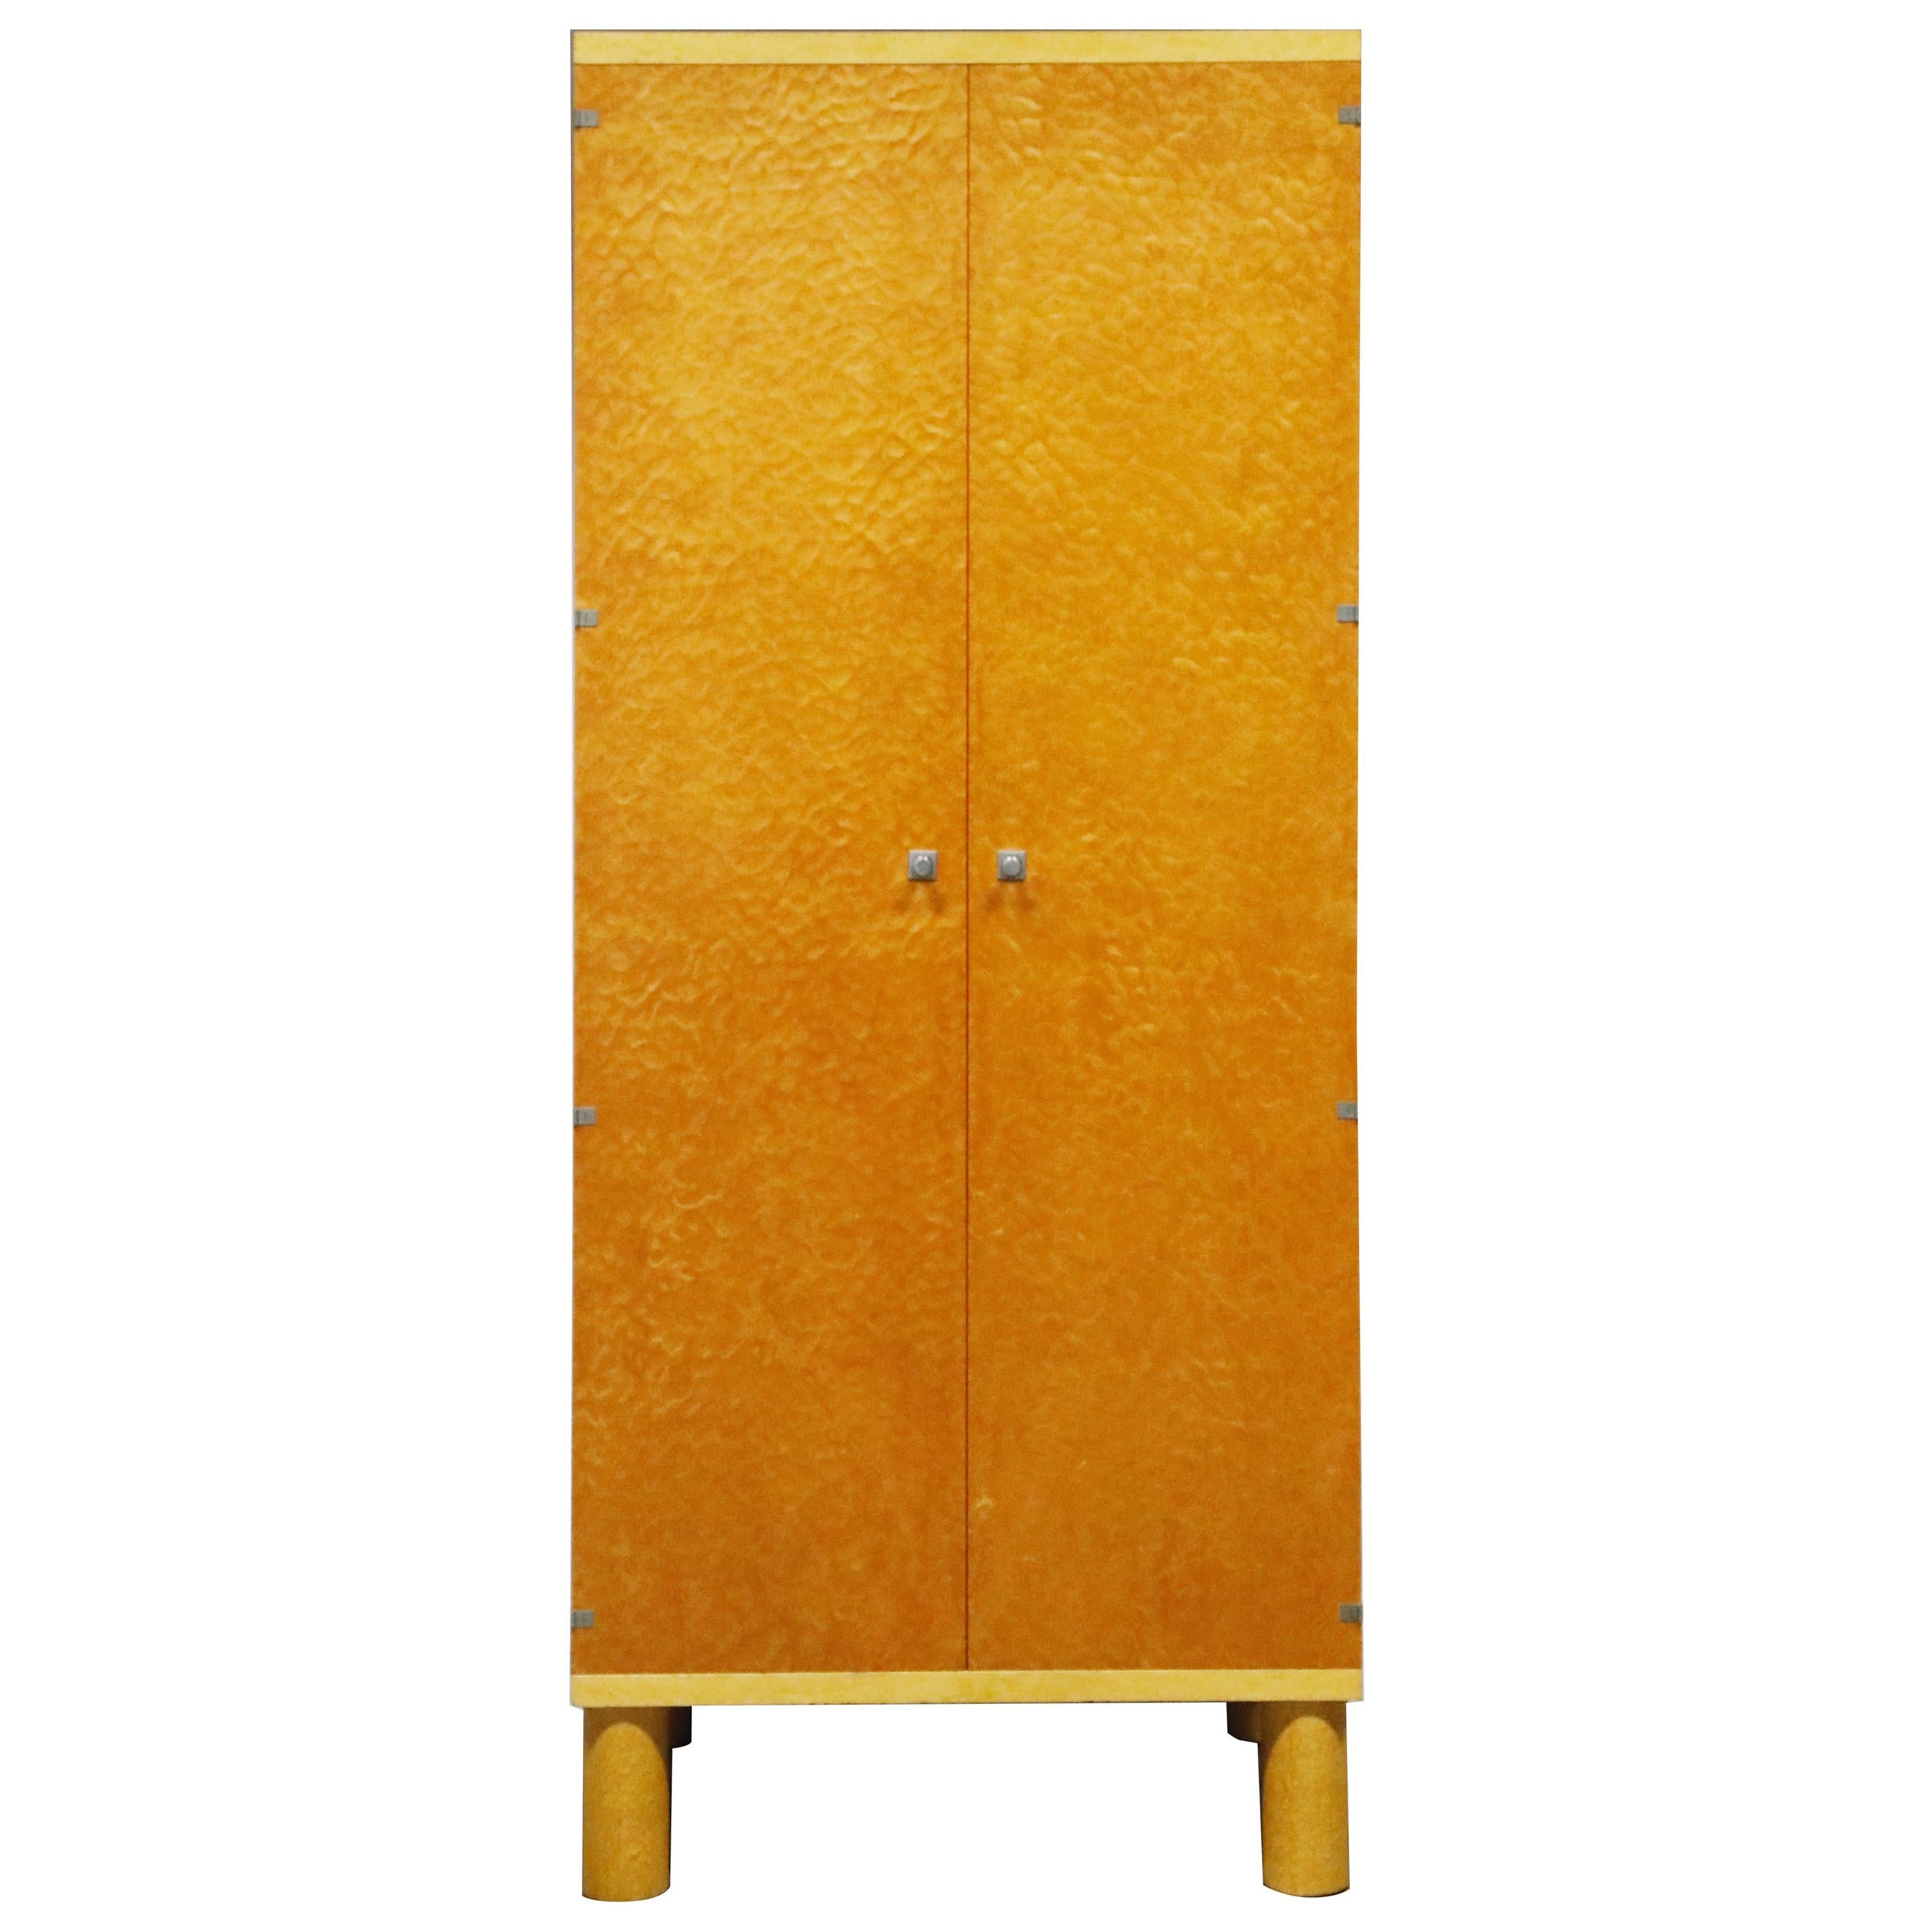 'Donau' Postmodern Armoire by Ettore Sottsass & Marco Zanini for Leitner, 1986